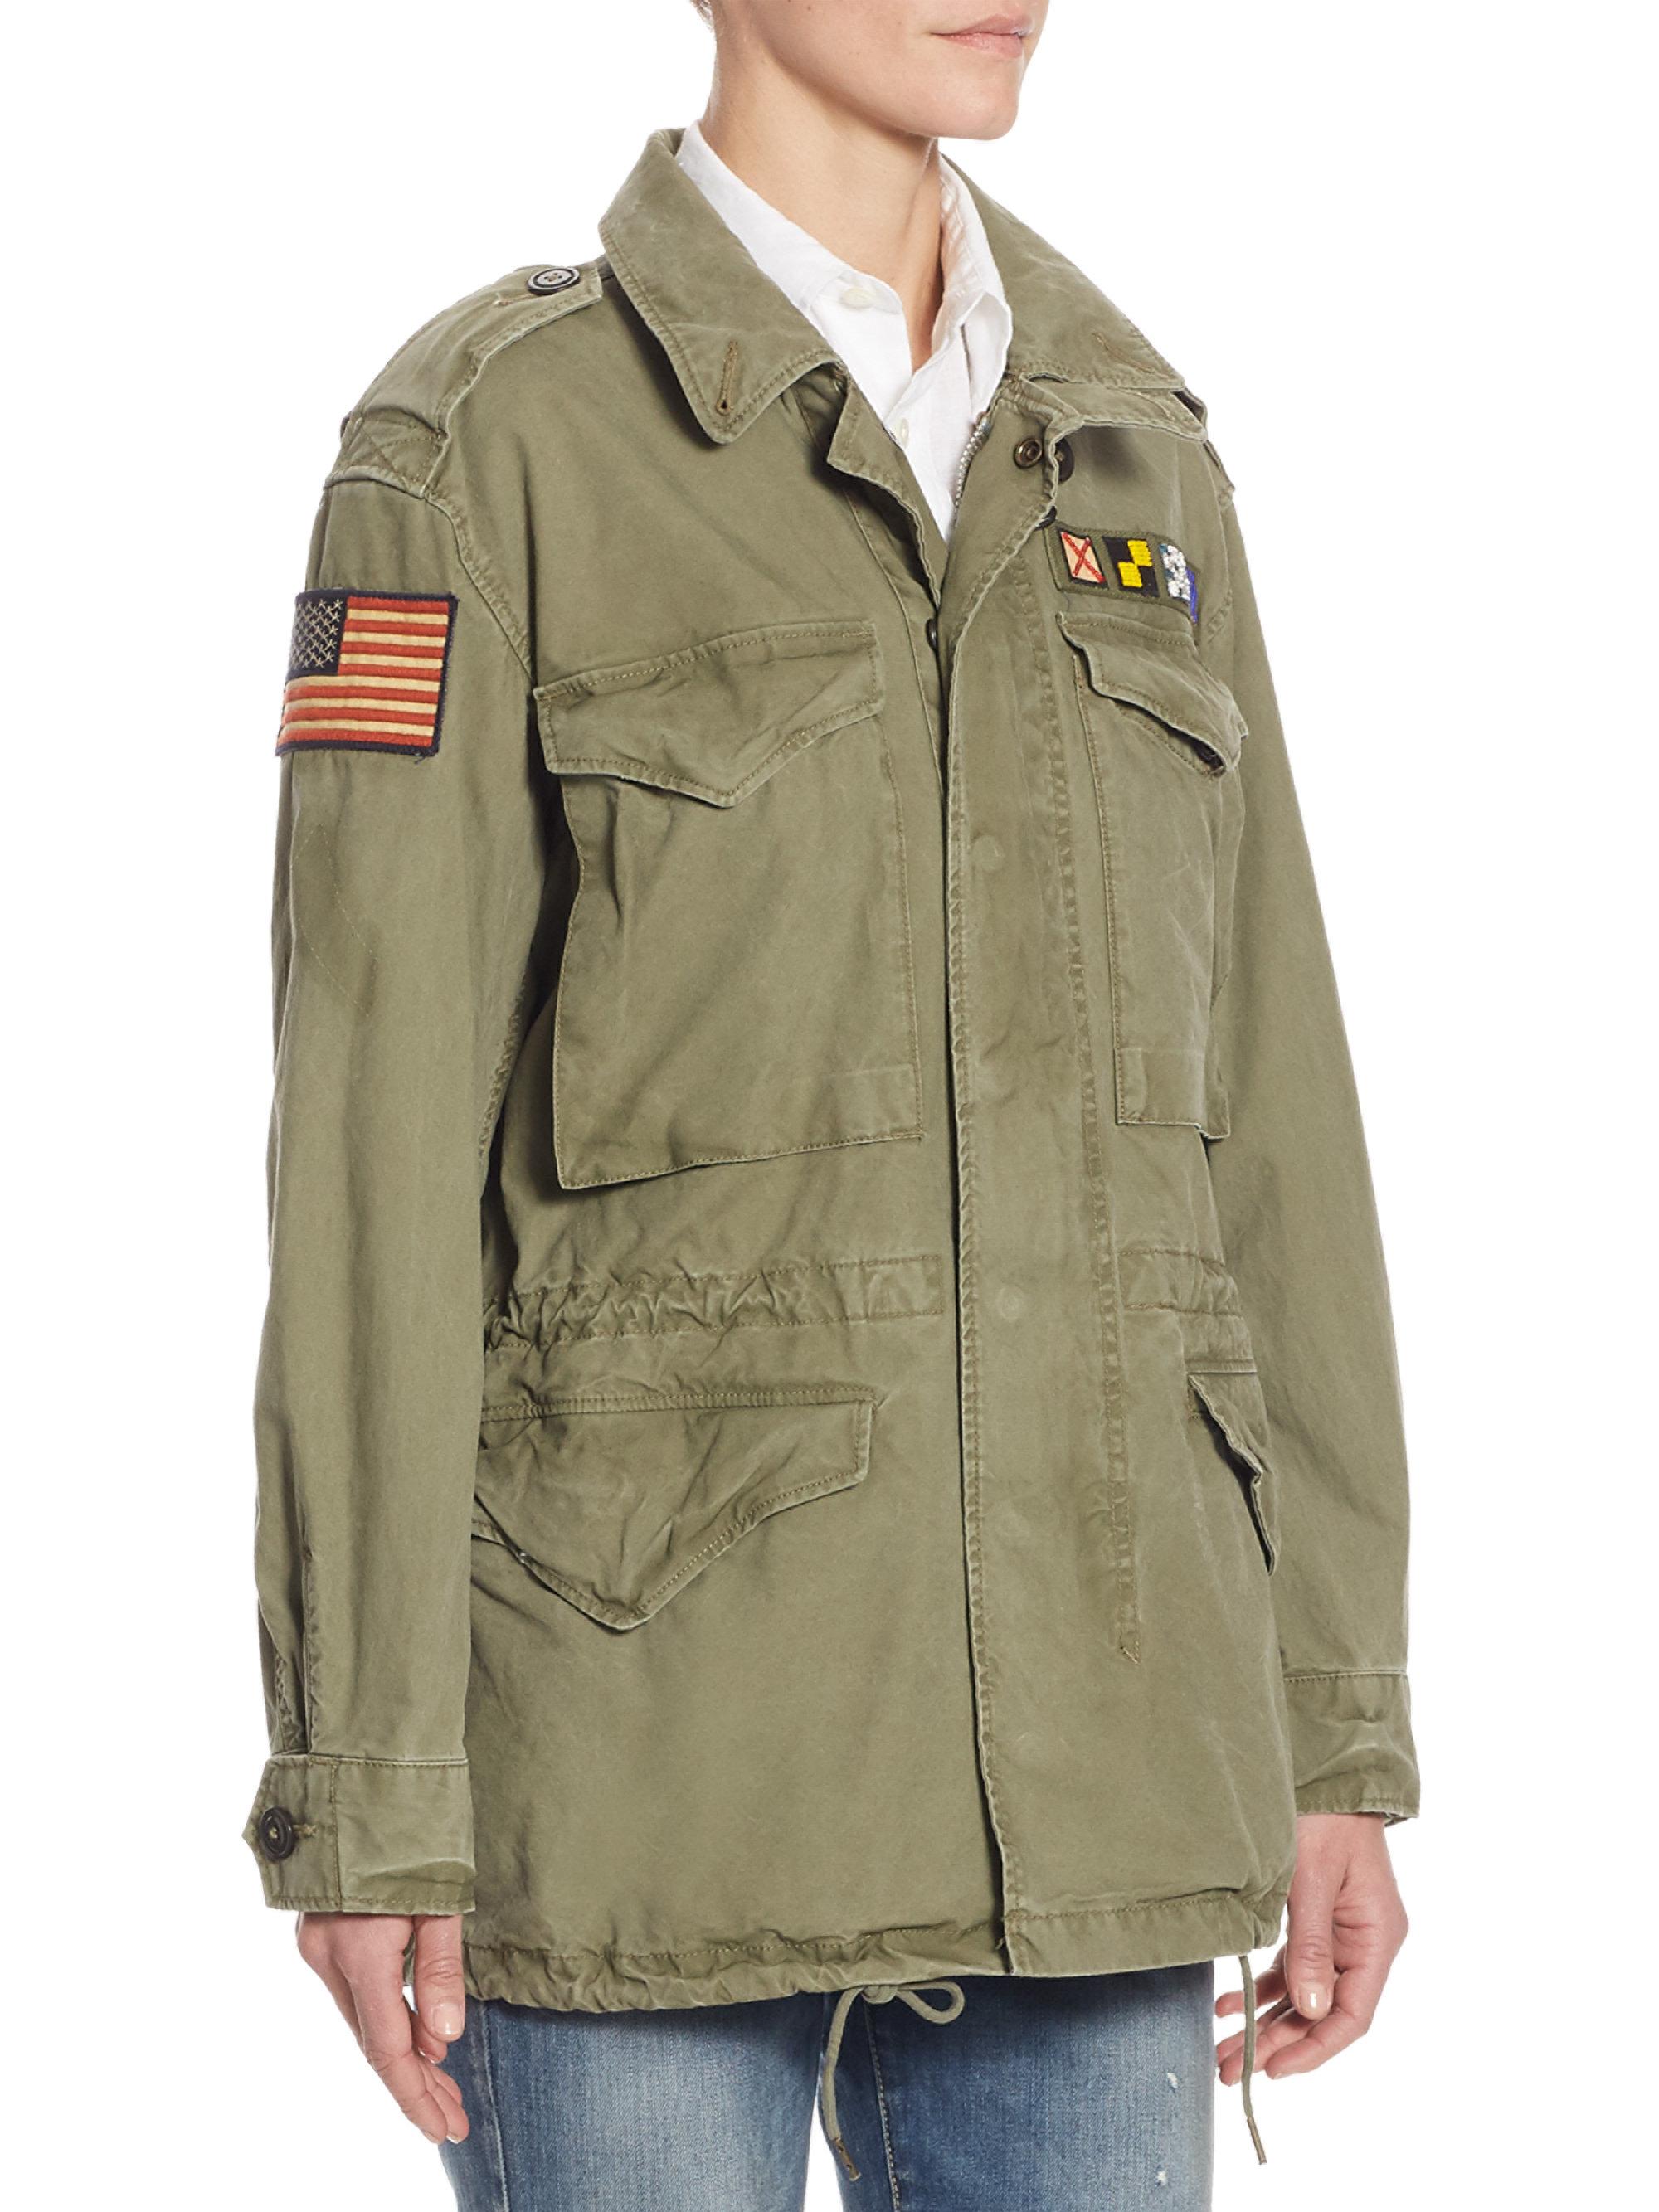 Polo Ralph Lauren Cotton Canvas Military Jacket in Green - Lyst